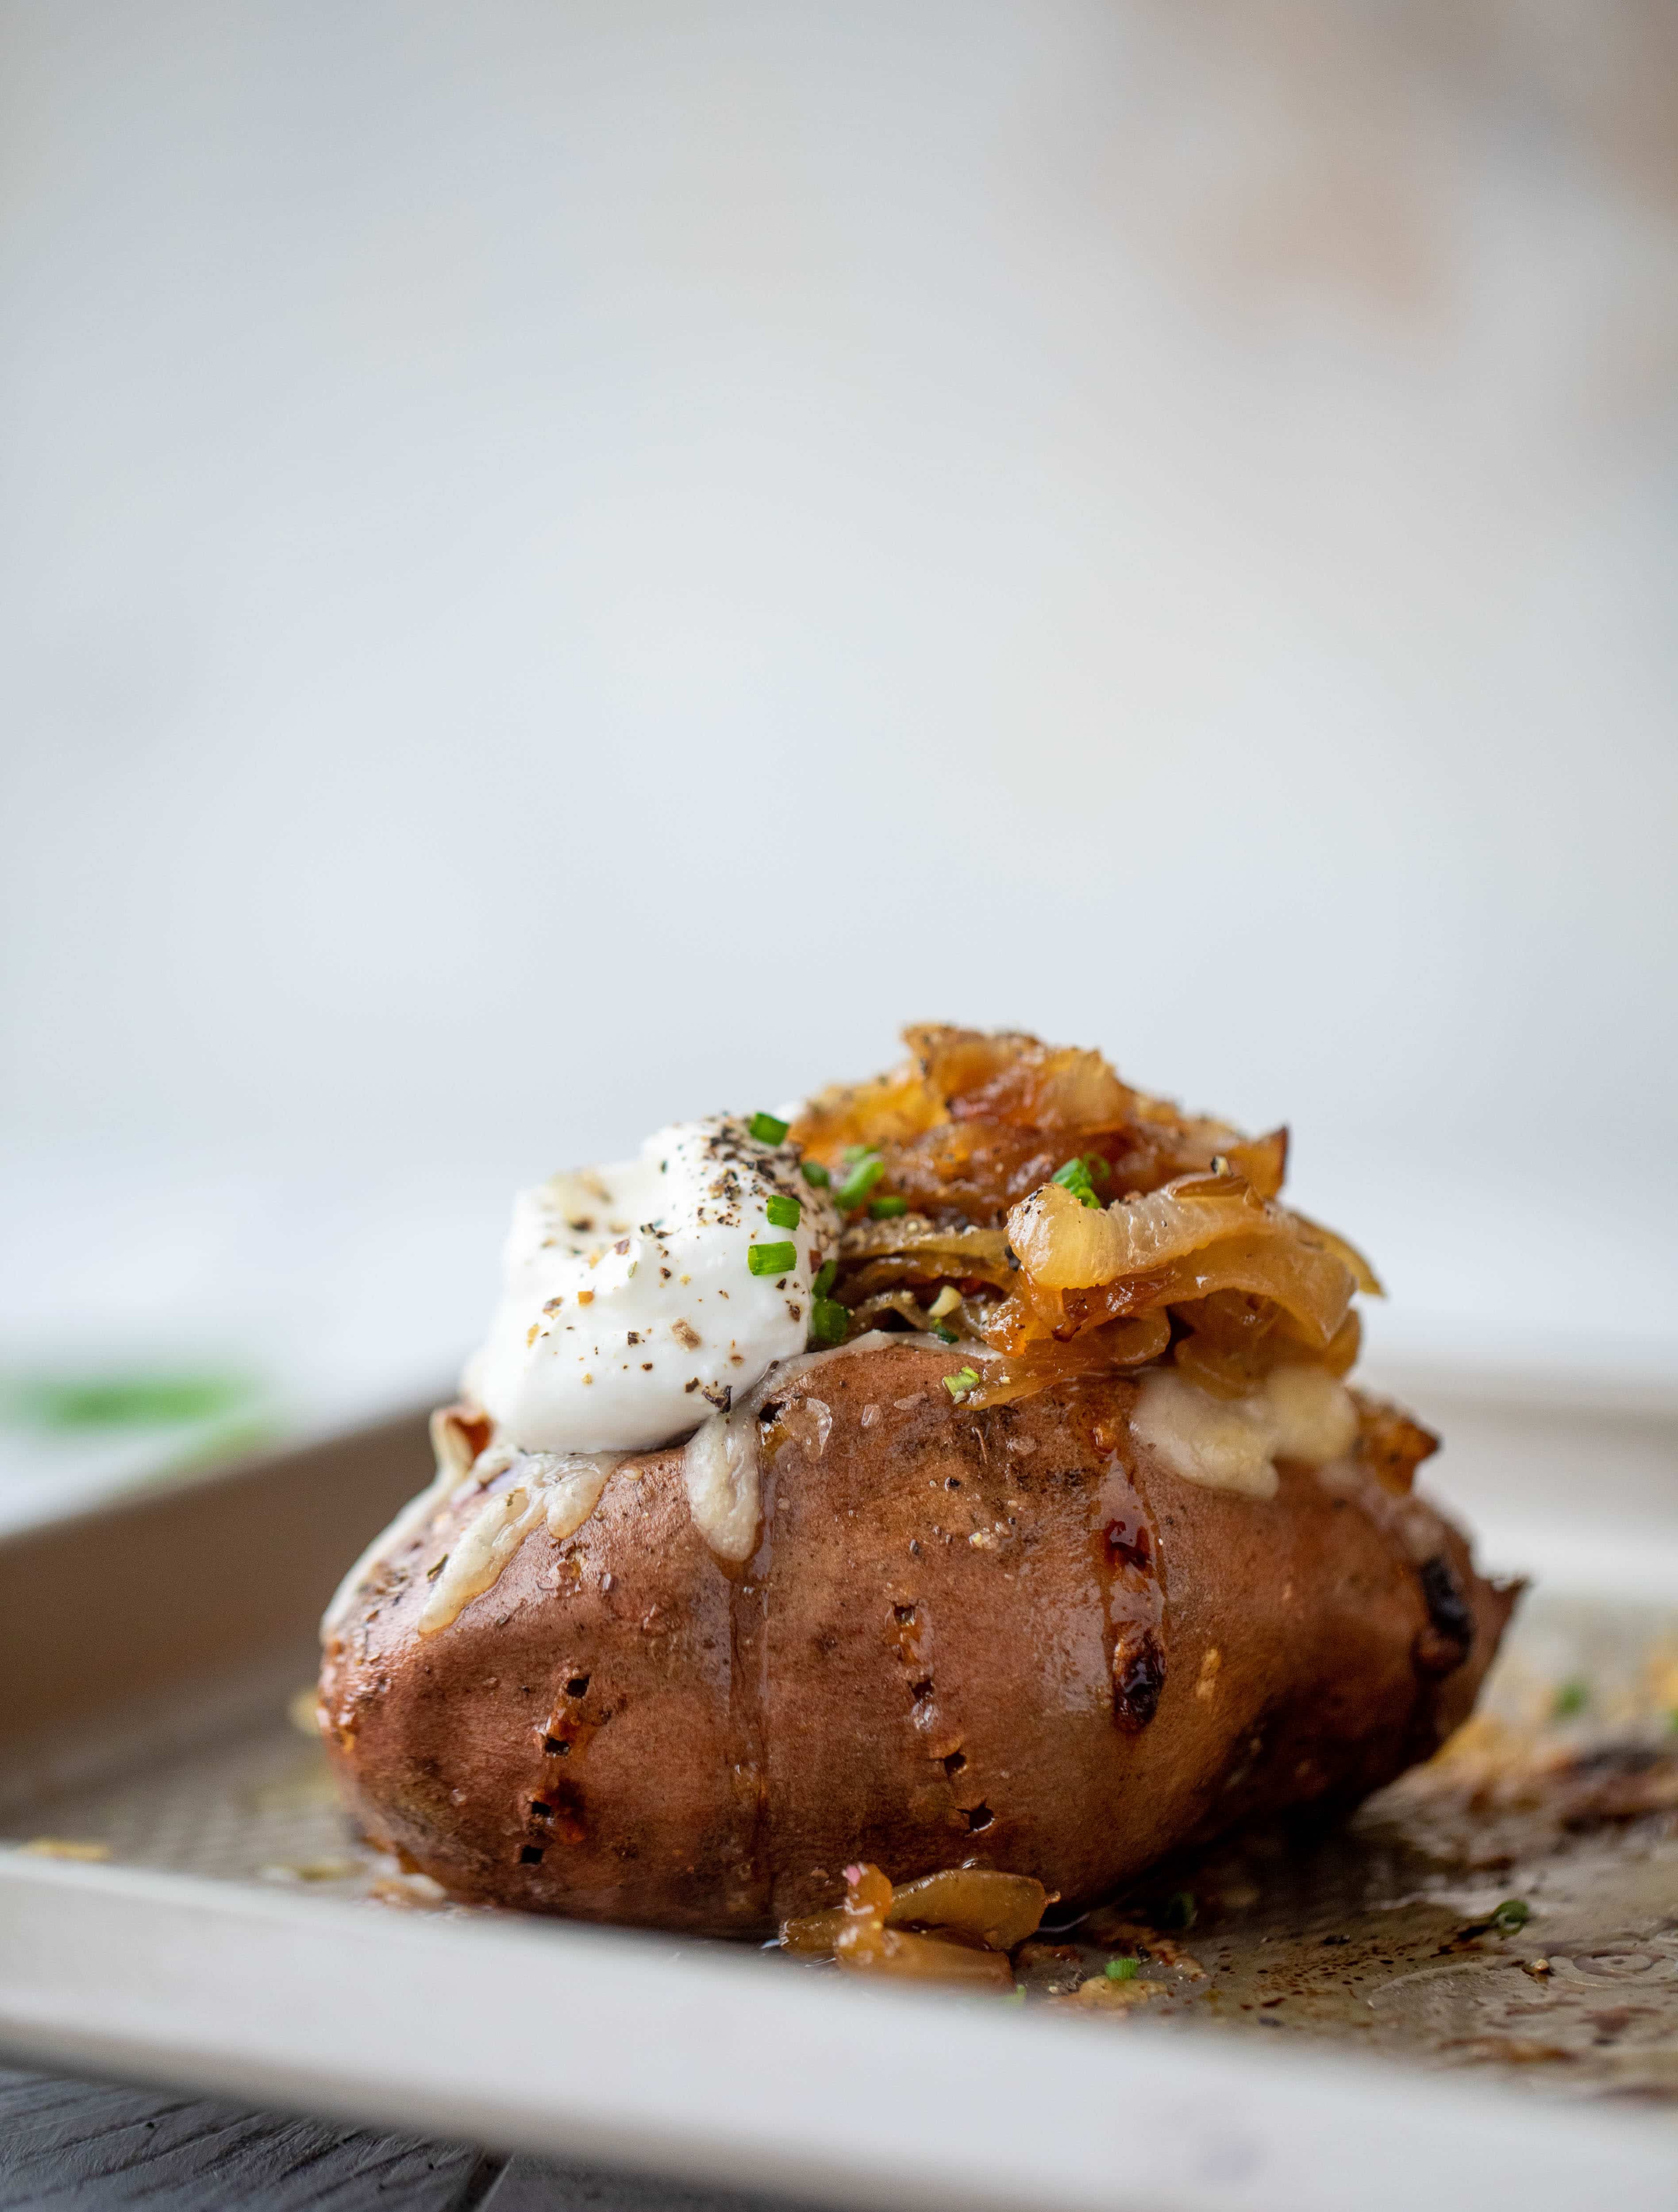 These french onion stuffed sweet potatoes are slow roasted and topped with gruyere cheese and caramelized onions. Garlic butter bread crumbs finish them!